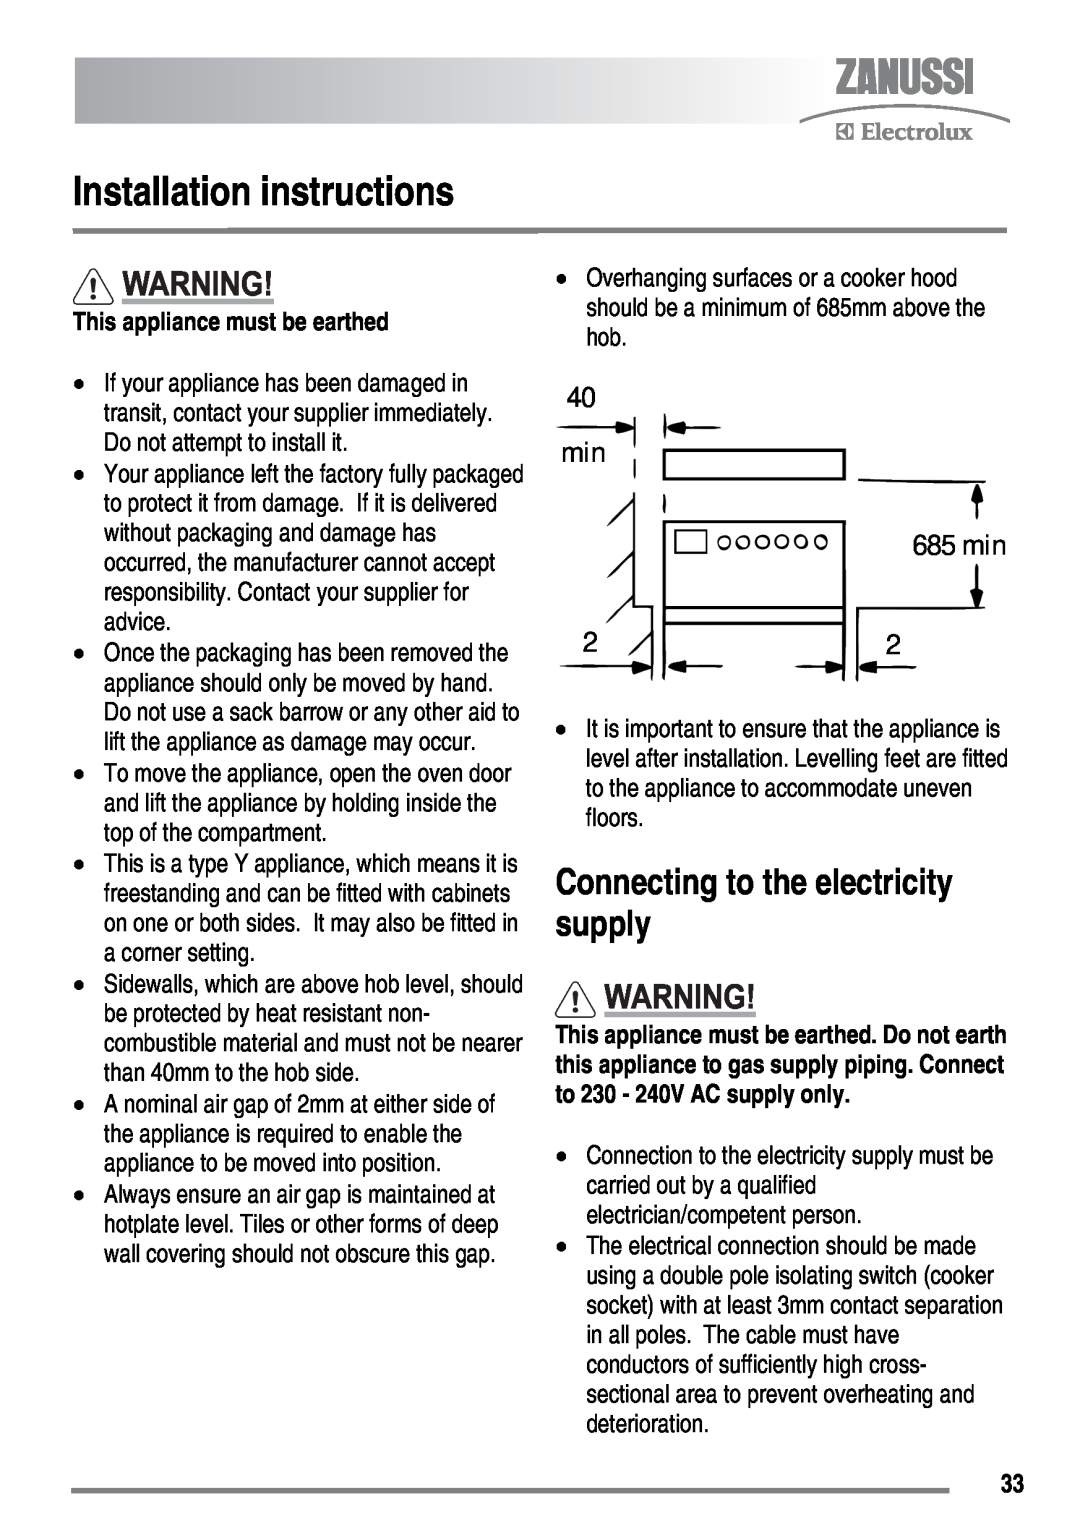 Zanussi ZKC6020 user manual Installation instructions, Connecting to the electricity supply, This appliance must be earthed 